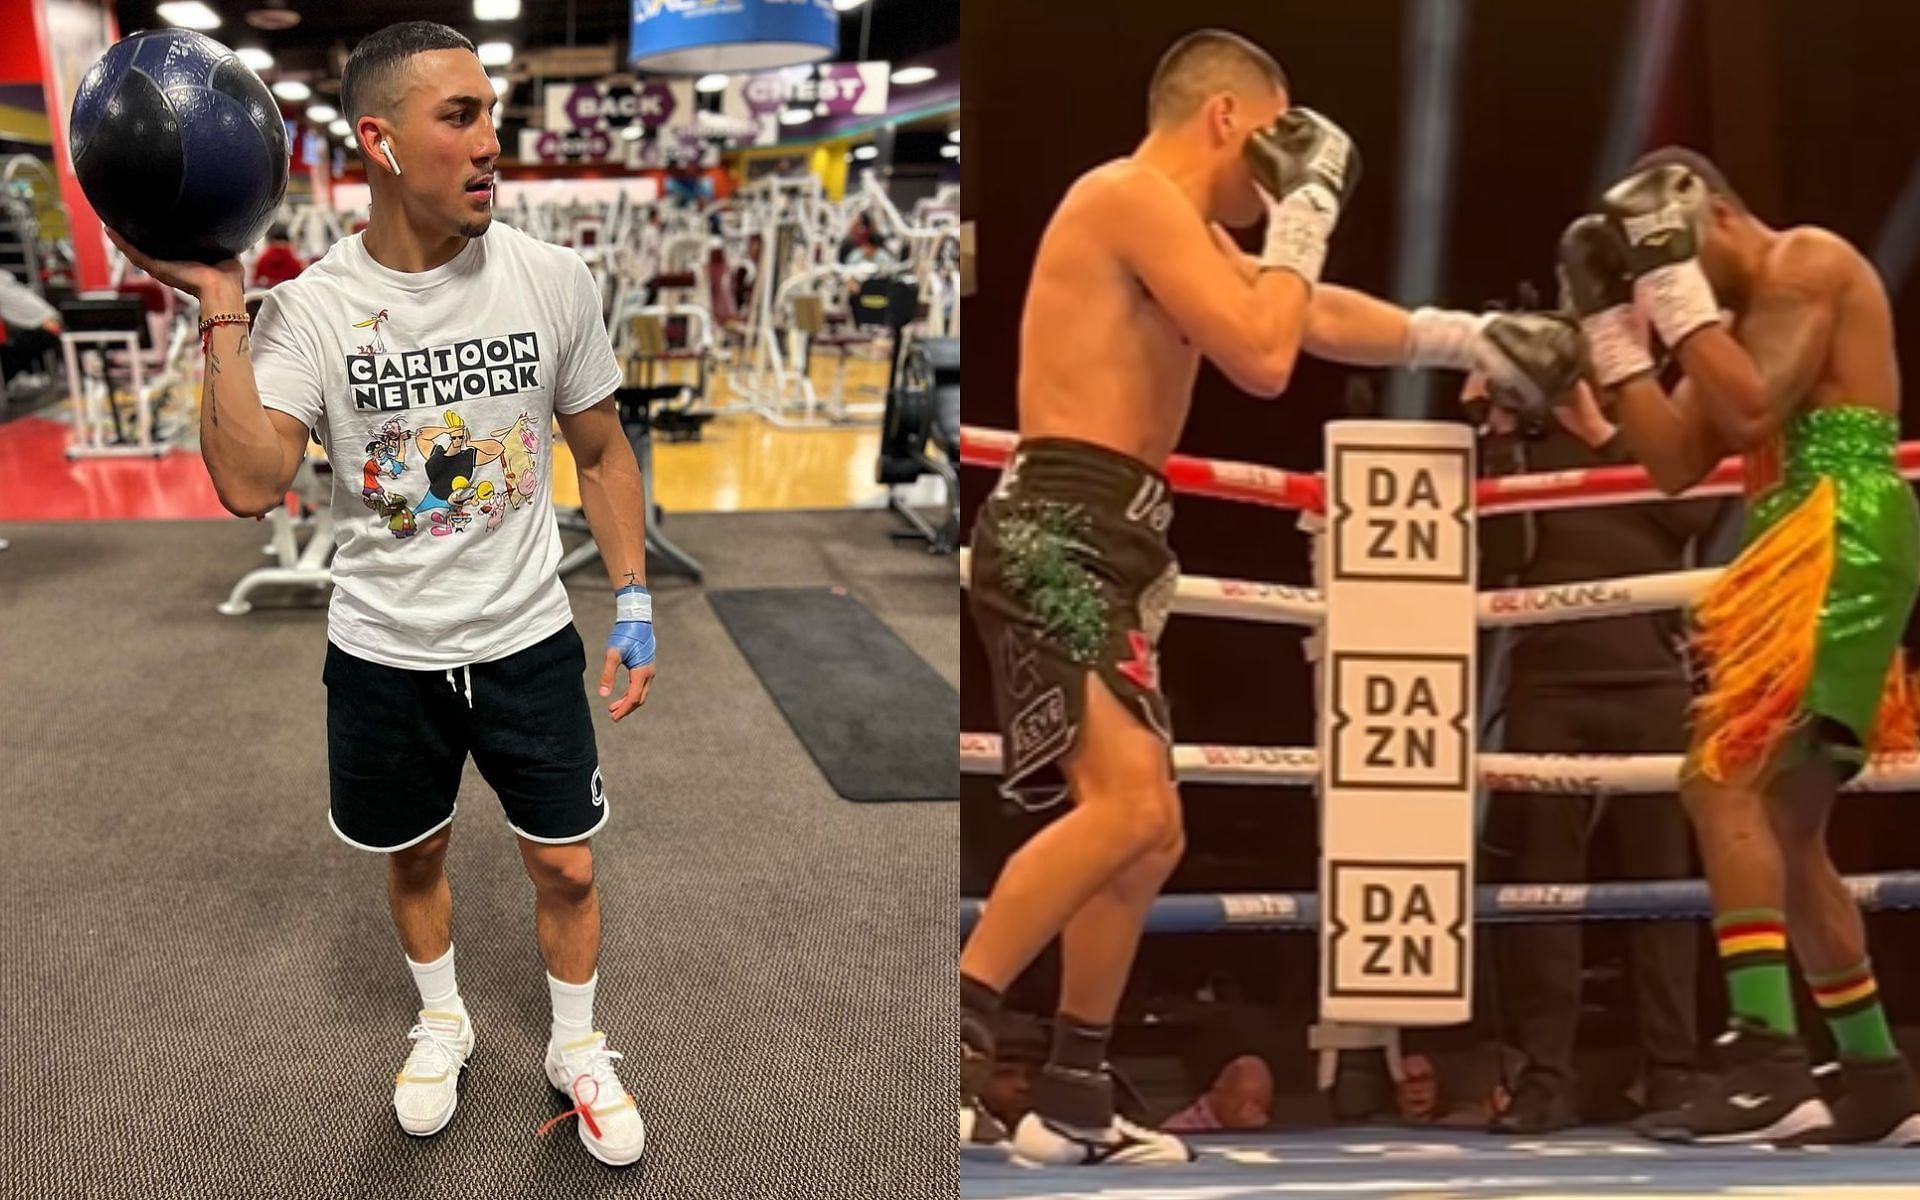 Theofimo Lopez (left) defends Vergil Ortiz Jr. (right with black trunks) on early stoppage controversy [Image courtesy @daznboxing and @teofimolopez on Instagram]